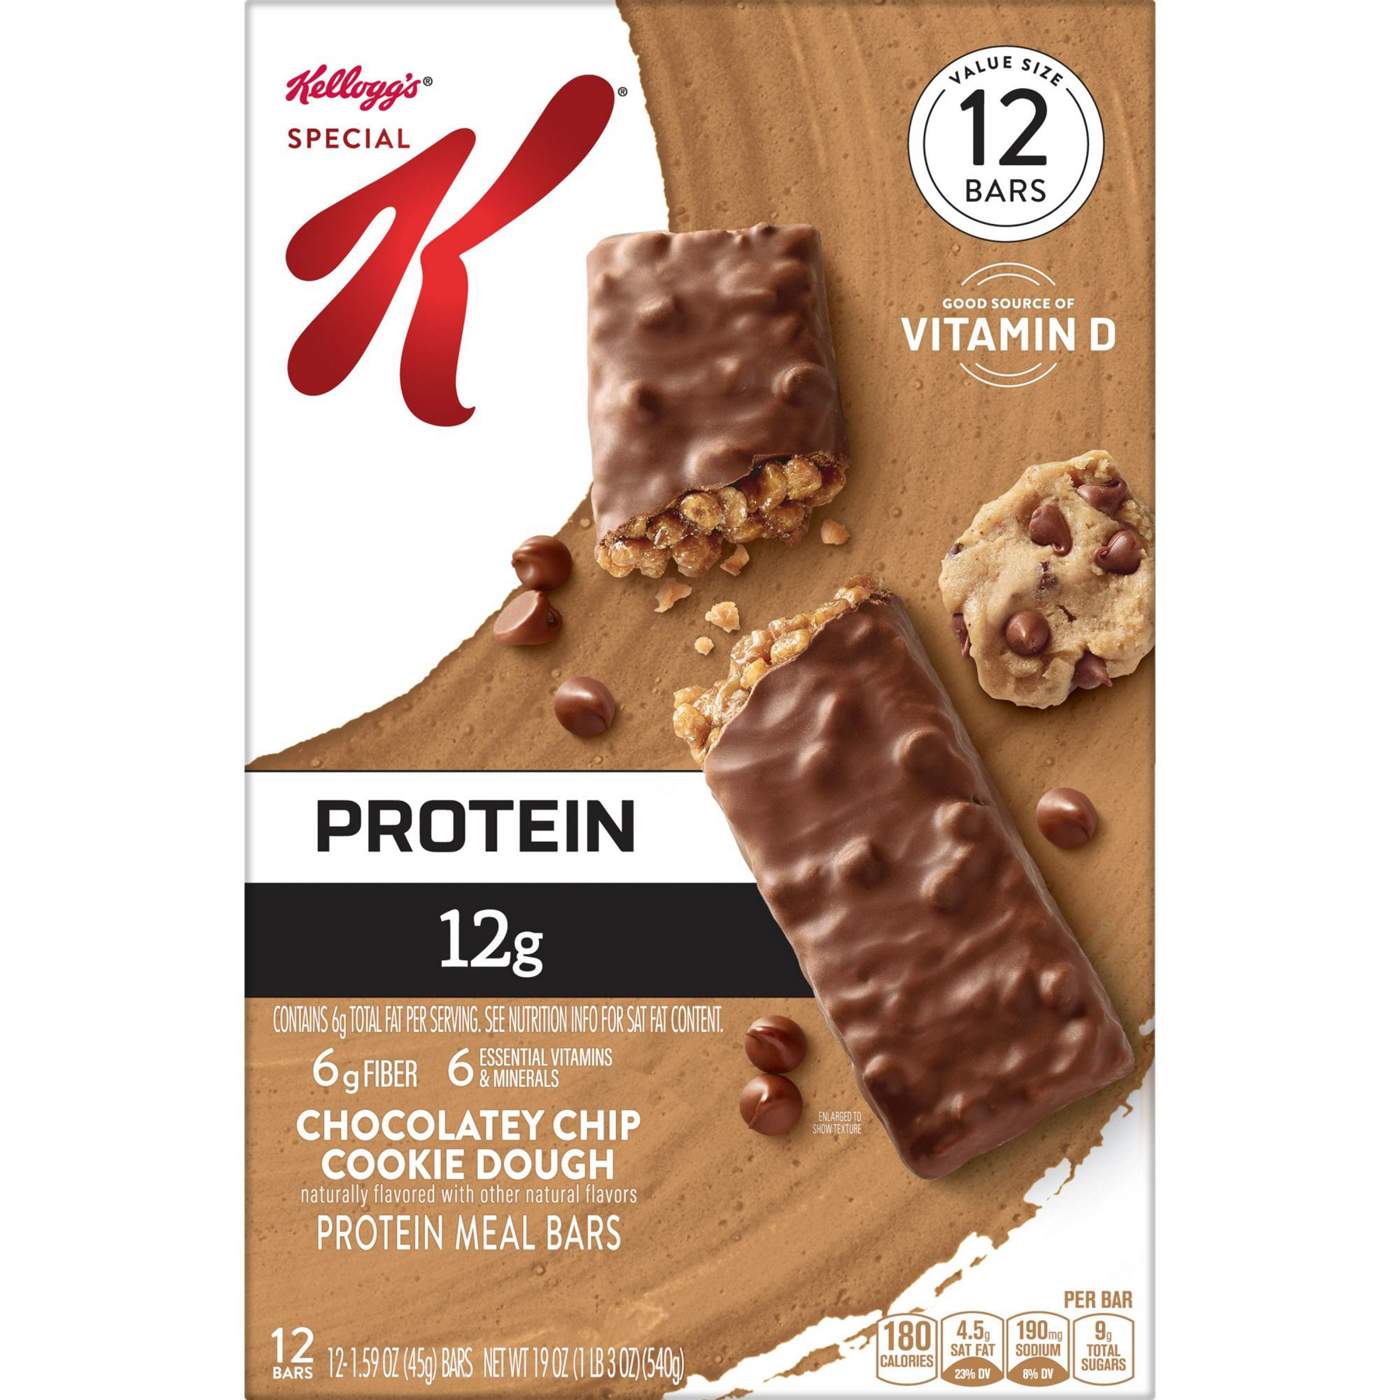 Kellogg's Special K Chocolatey Chip Cookie Dough Protein Meal Bars; image 2 of 4